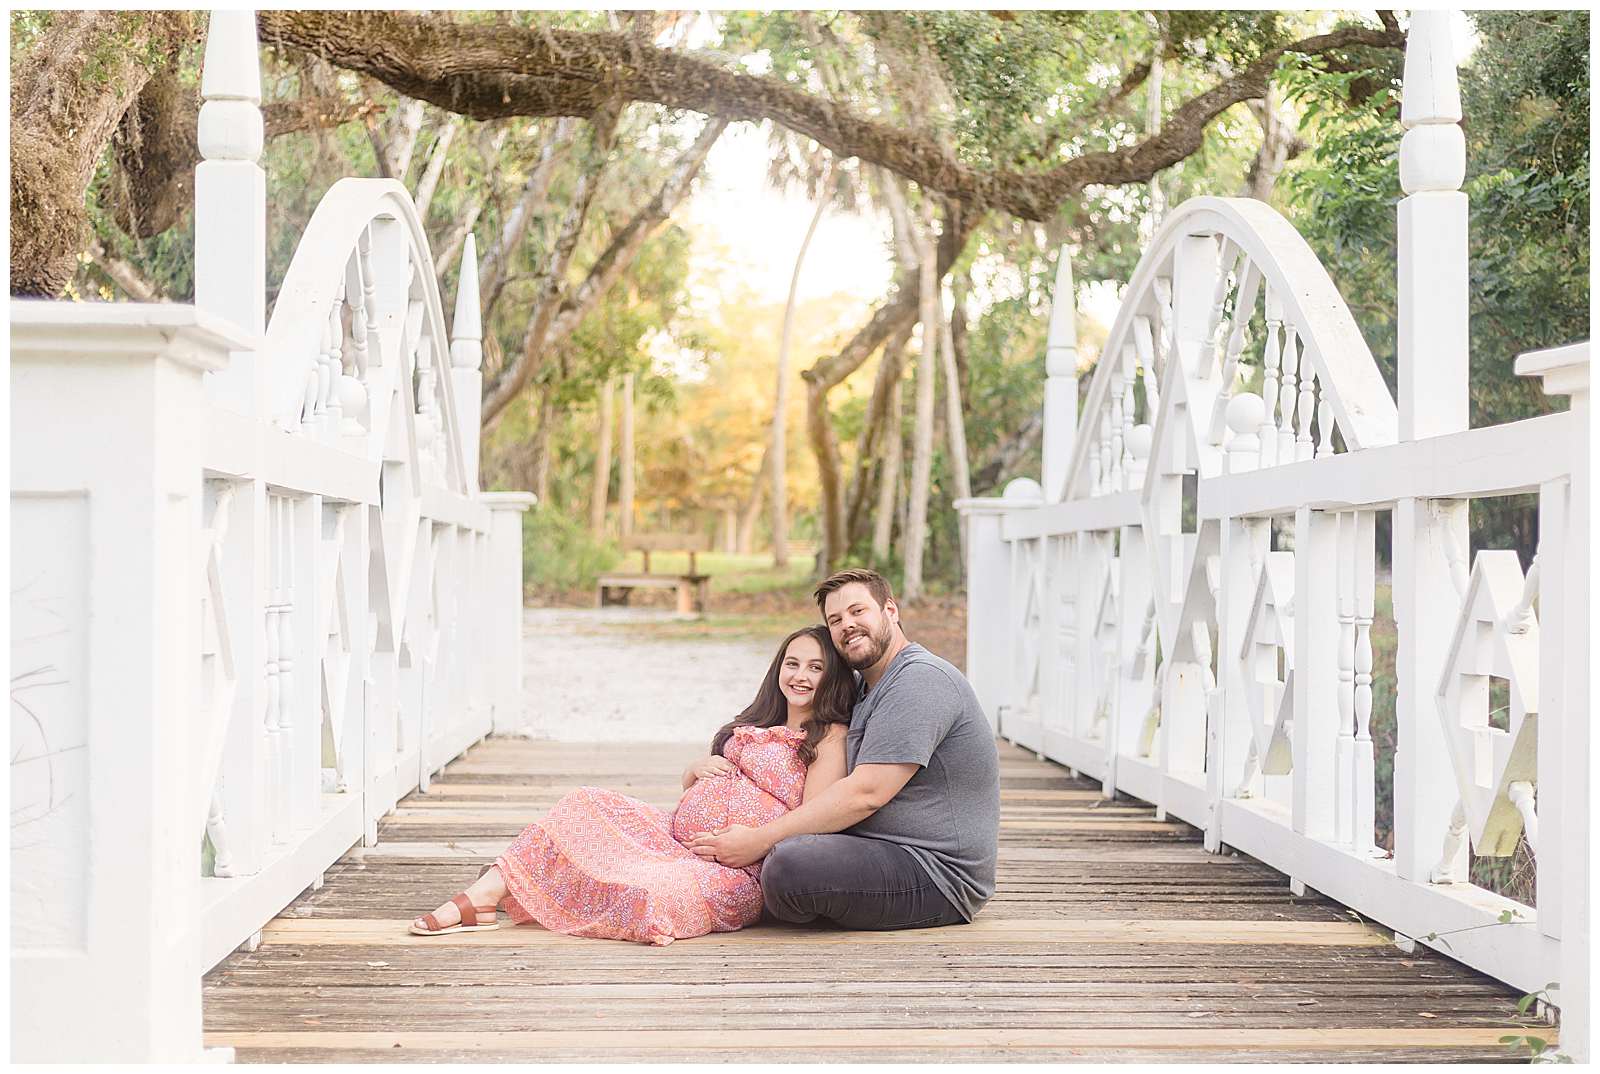 Couple sits on wooden bridge and smiles at the camera of Rebecca Rice Photography who captures this Florida maternity session.  Pregnant momma sits back into her husbands lap as they lean into each other and smile.  See more from this session on the blog today!
-rebeccaricephoto.com